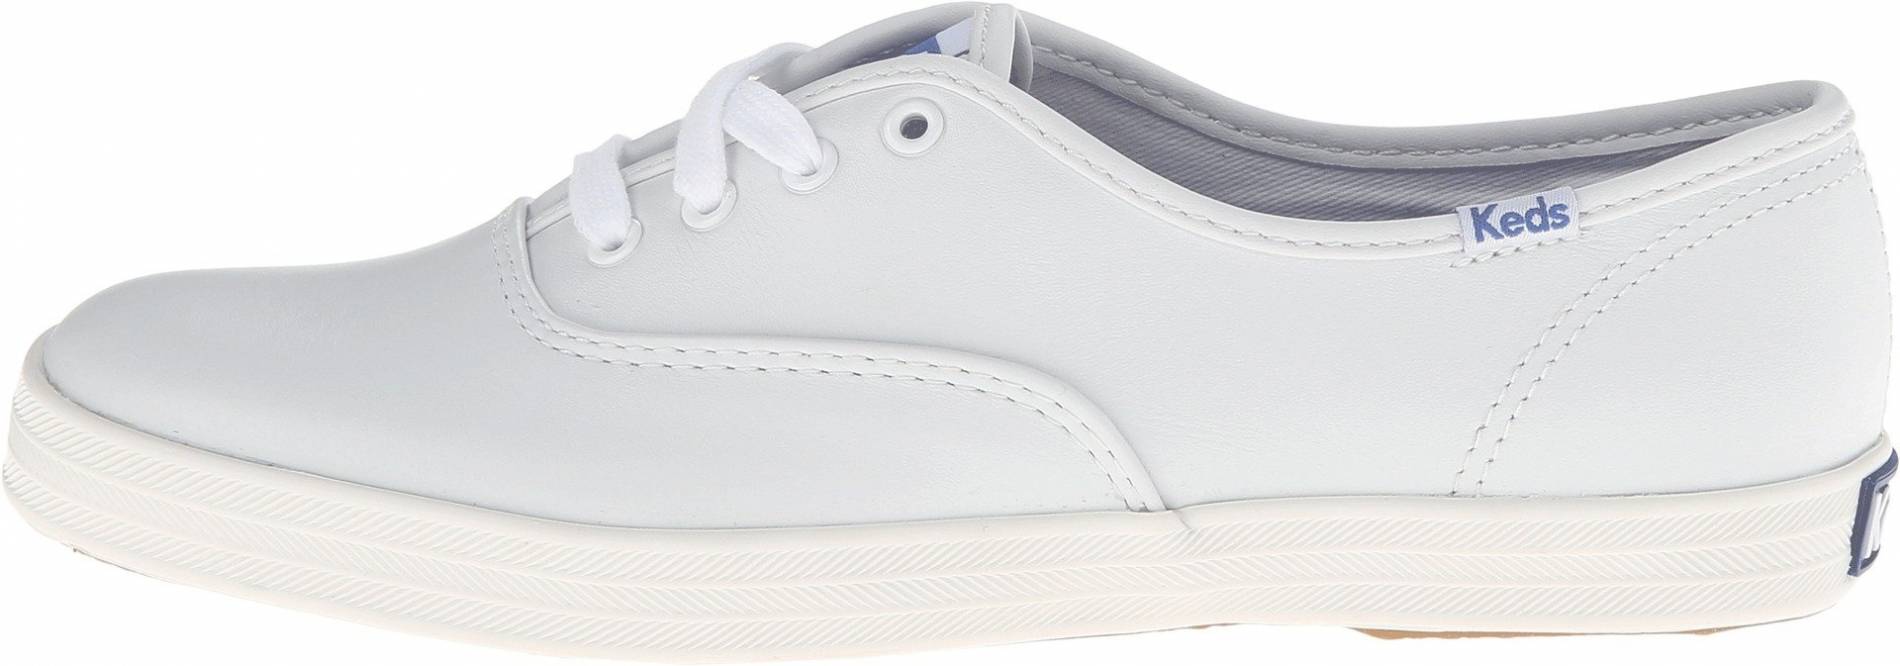 champion white leather shoes